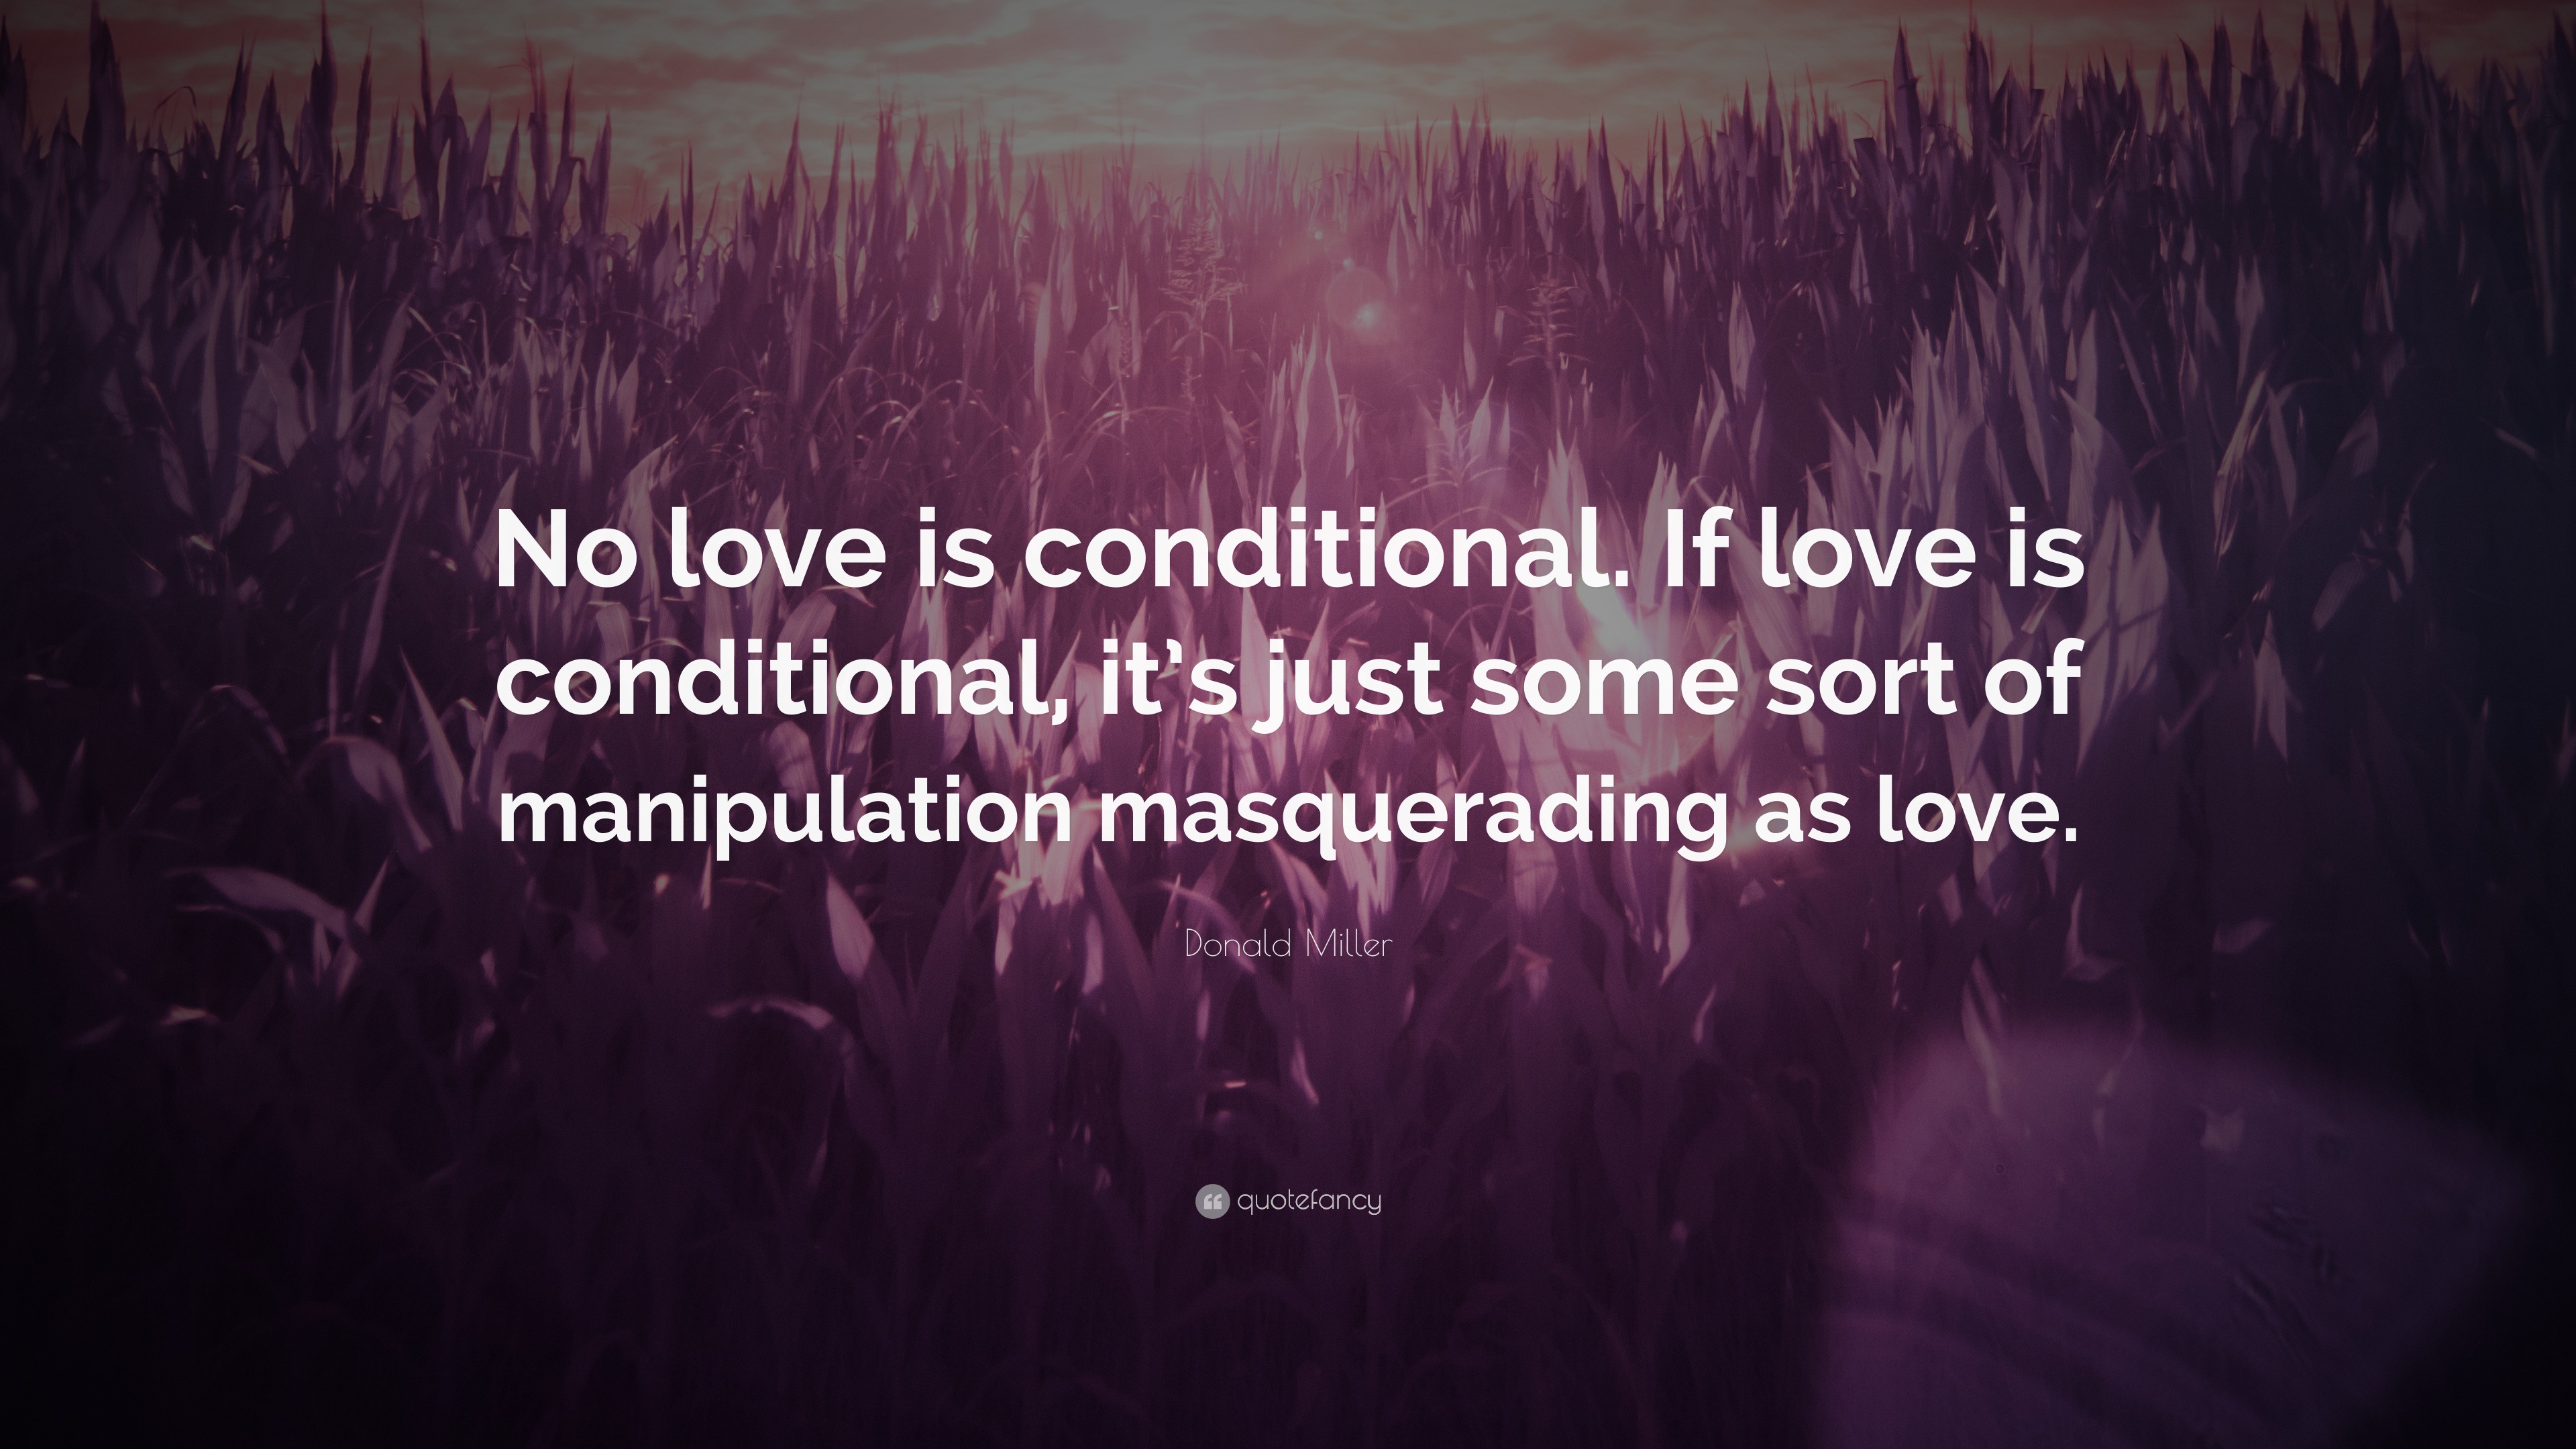 is conditional love healthy